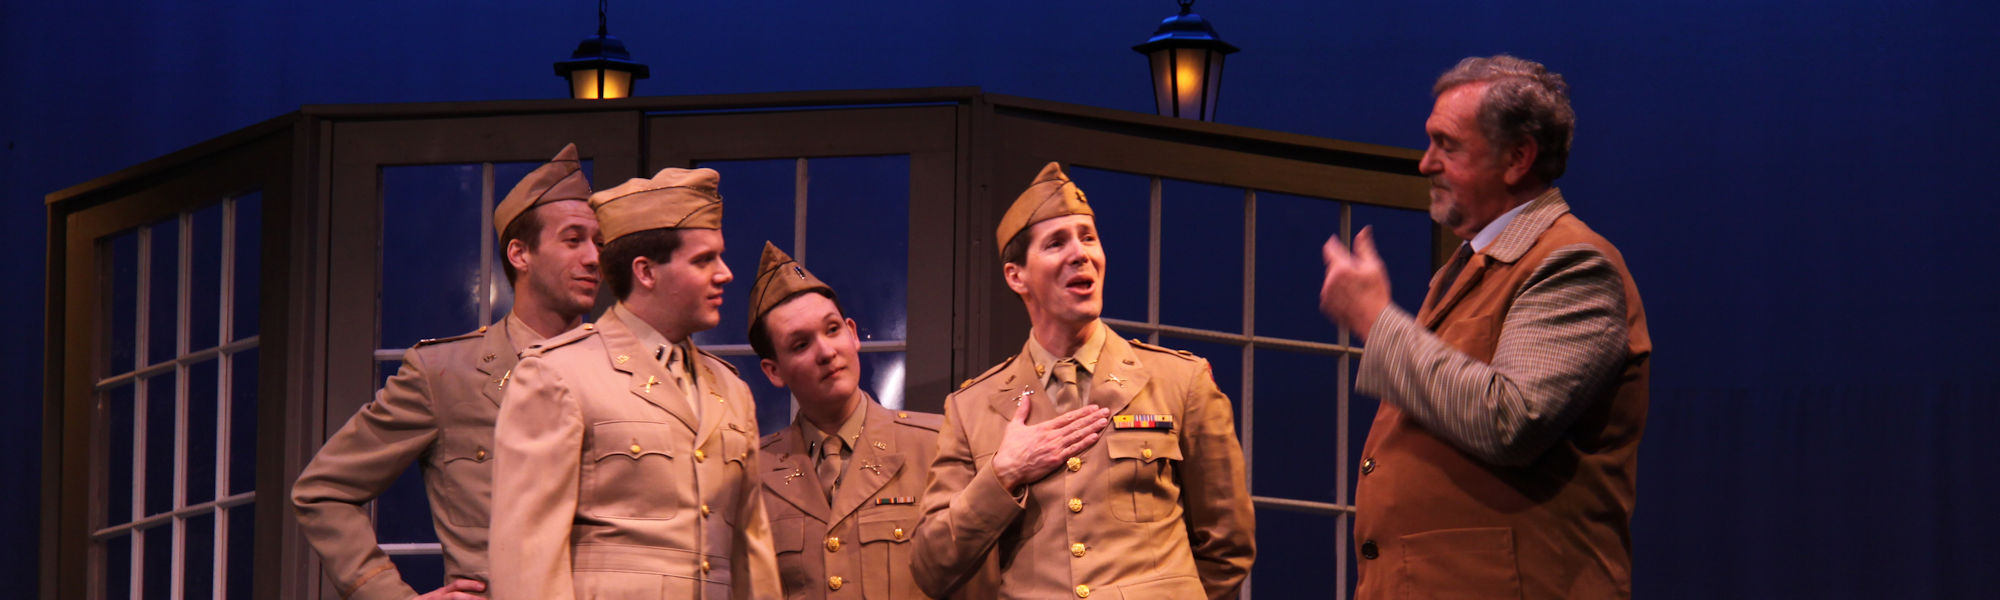 From RLT's production of Much Ado About Nothing, February 2015